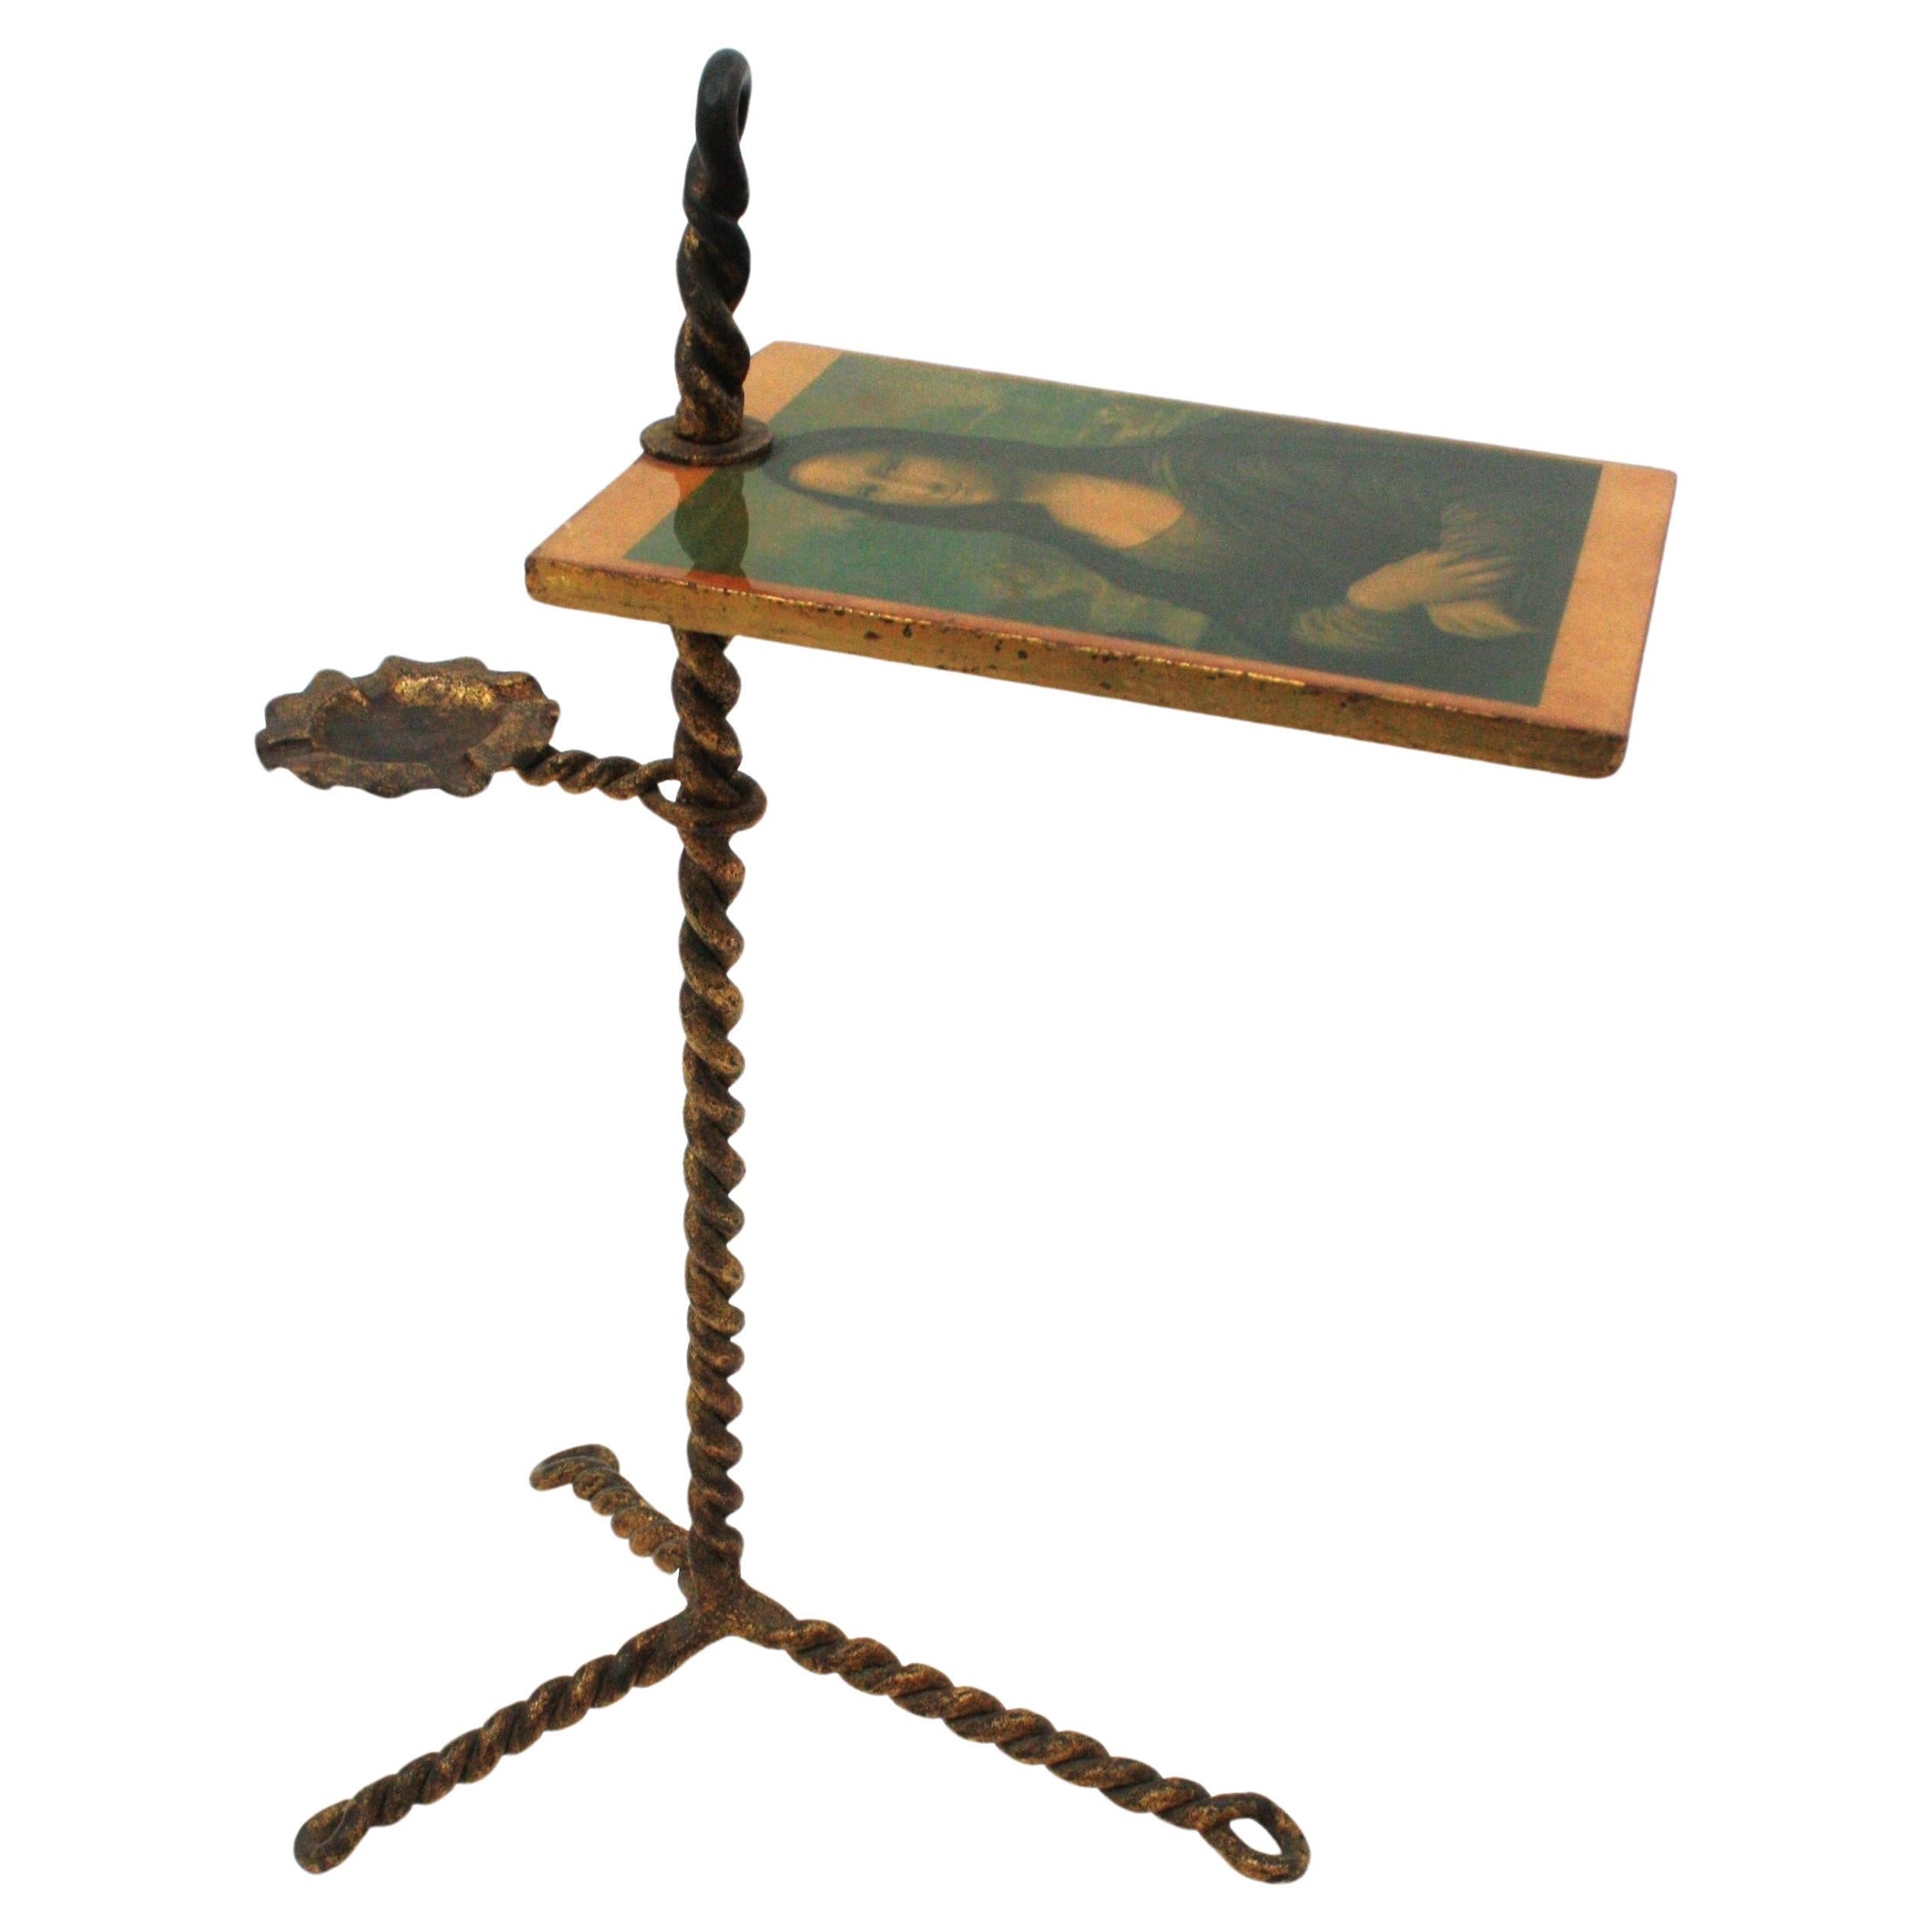 Metal Spanish Tripod Drinks Table with Ashtray, Twisting Hand Forged Gilt Iron, 1940s For Sale